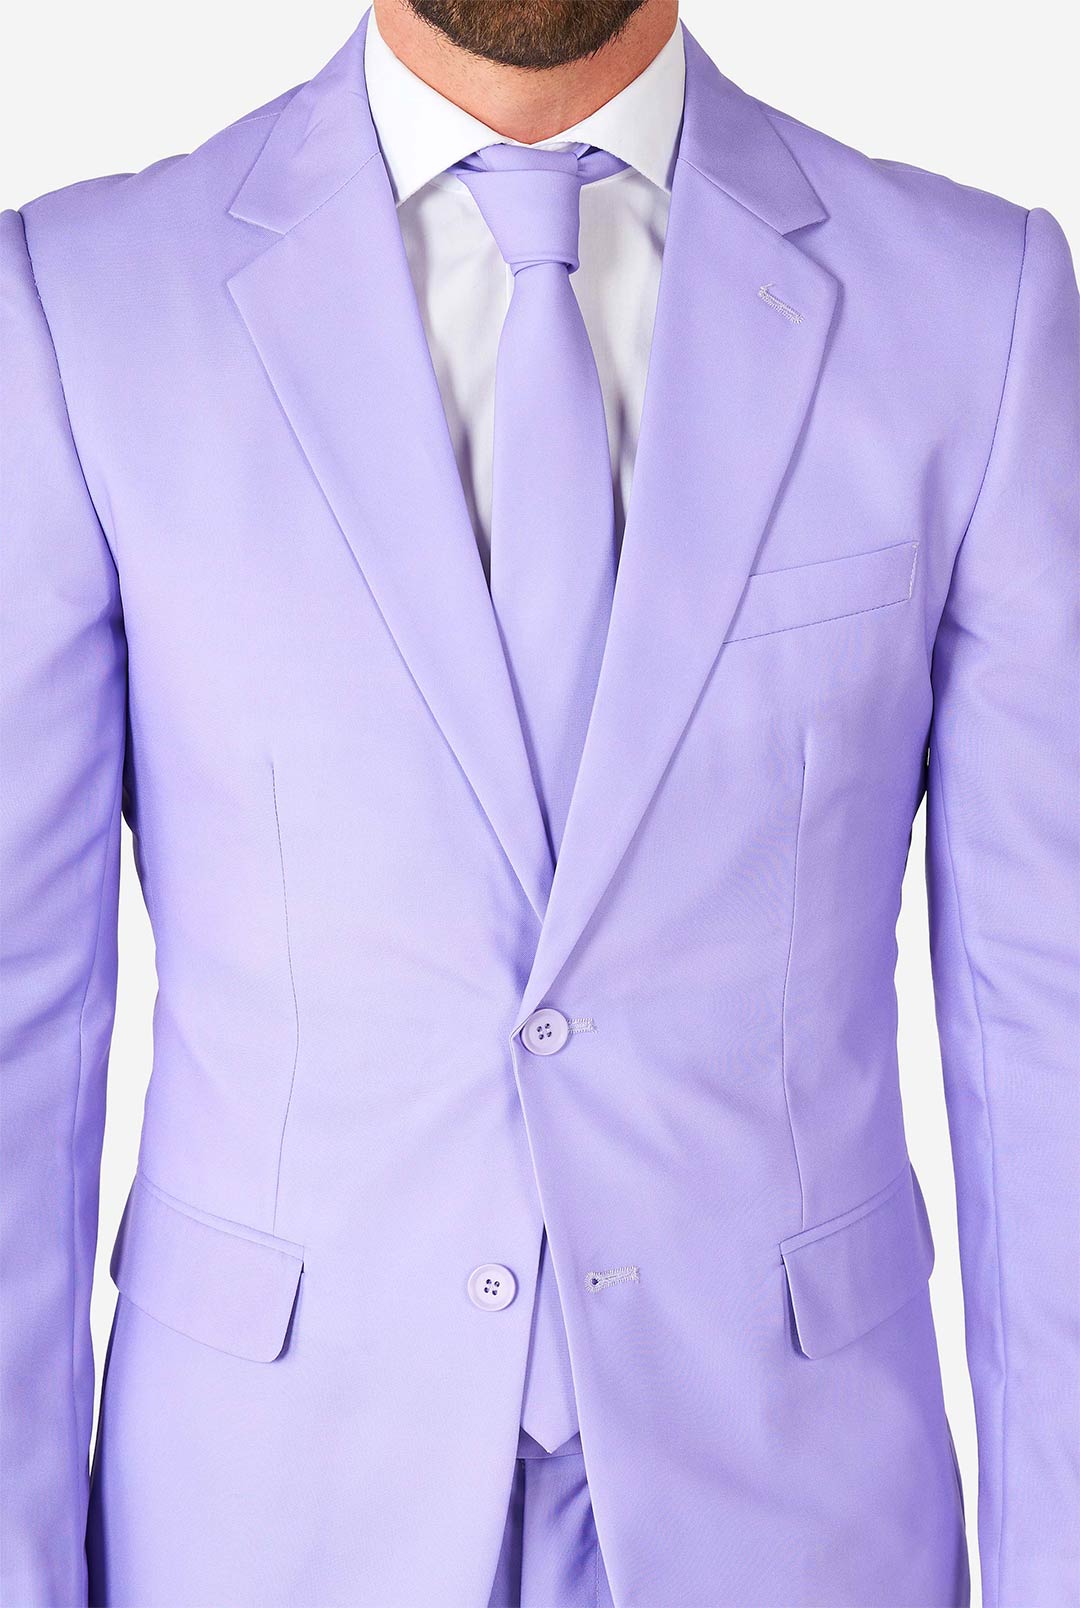 Does a purple dress match with a brown suit? - Quora